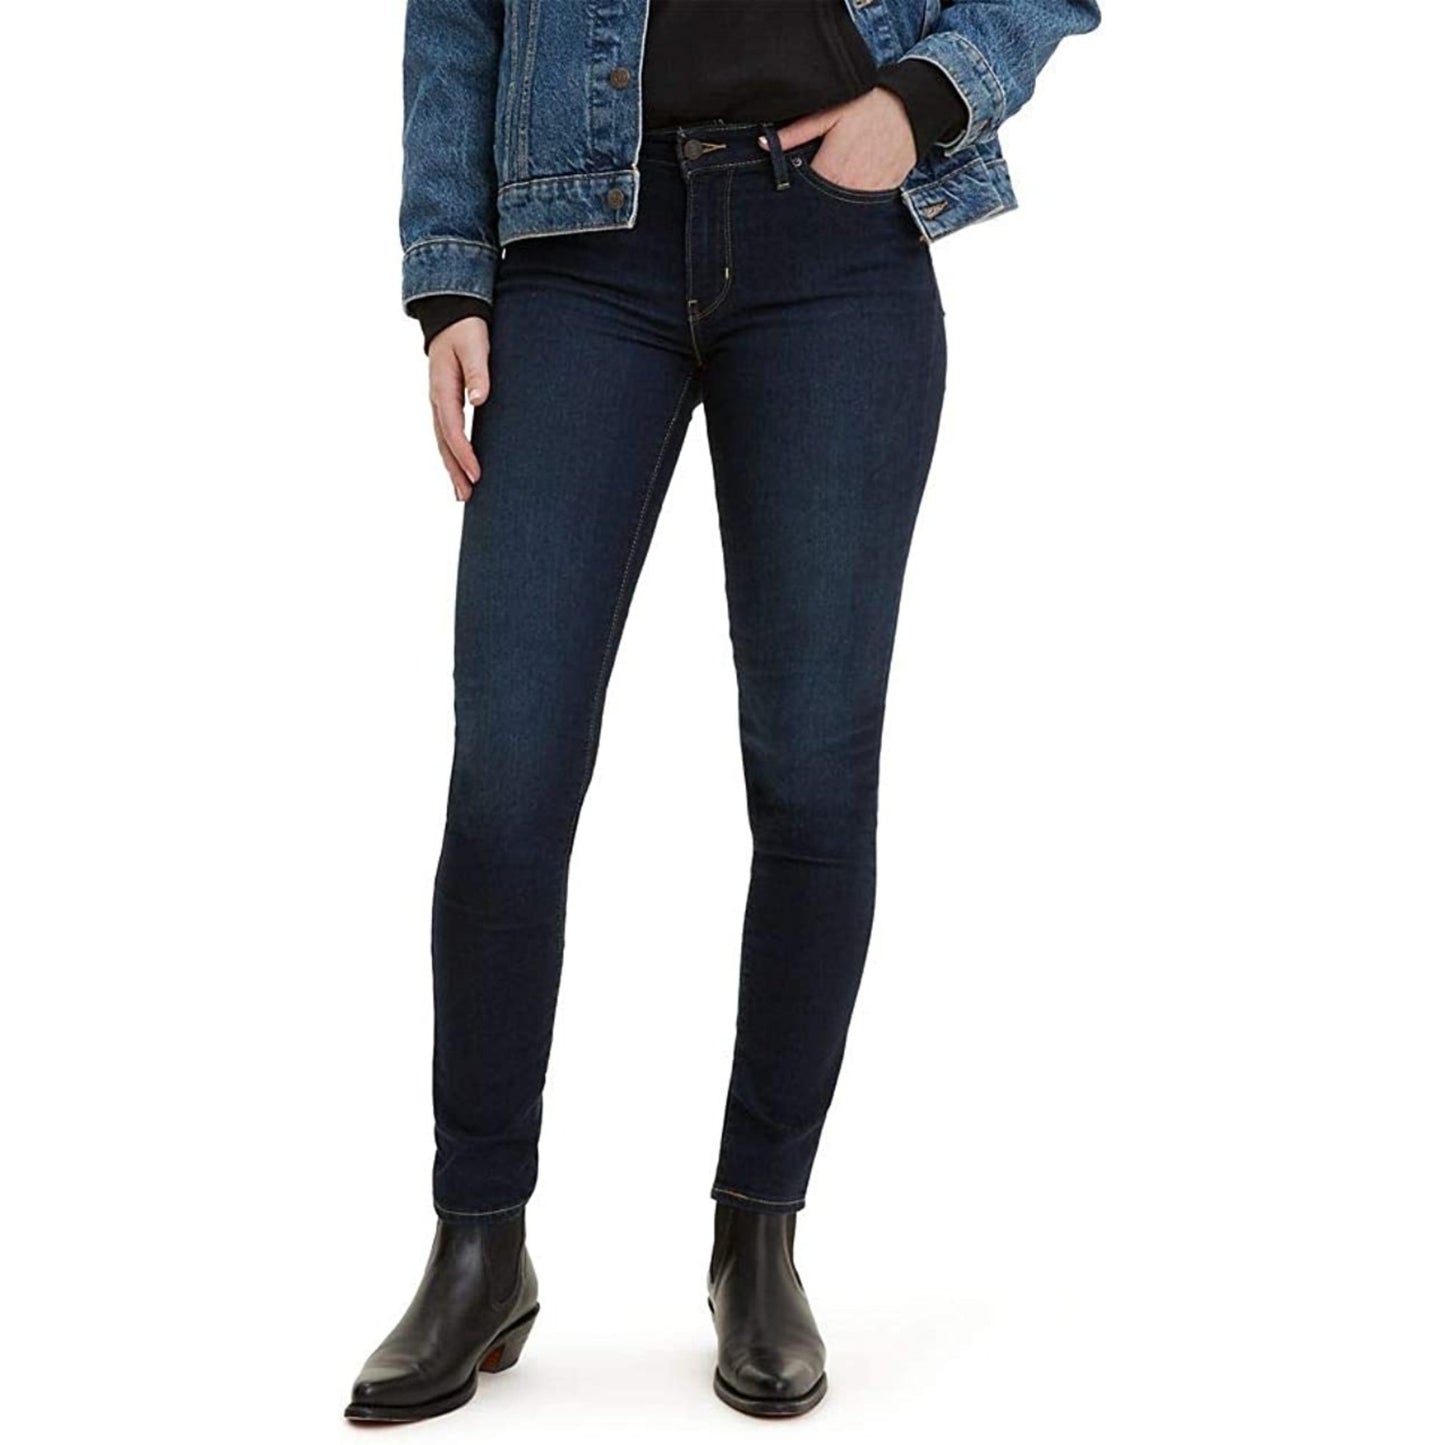 LEVI'S 711 Skinny Jeans for Women - Cast Shadows (Size 26R)